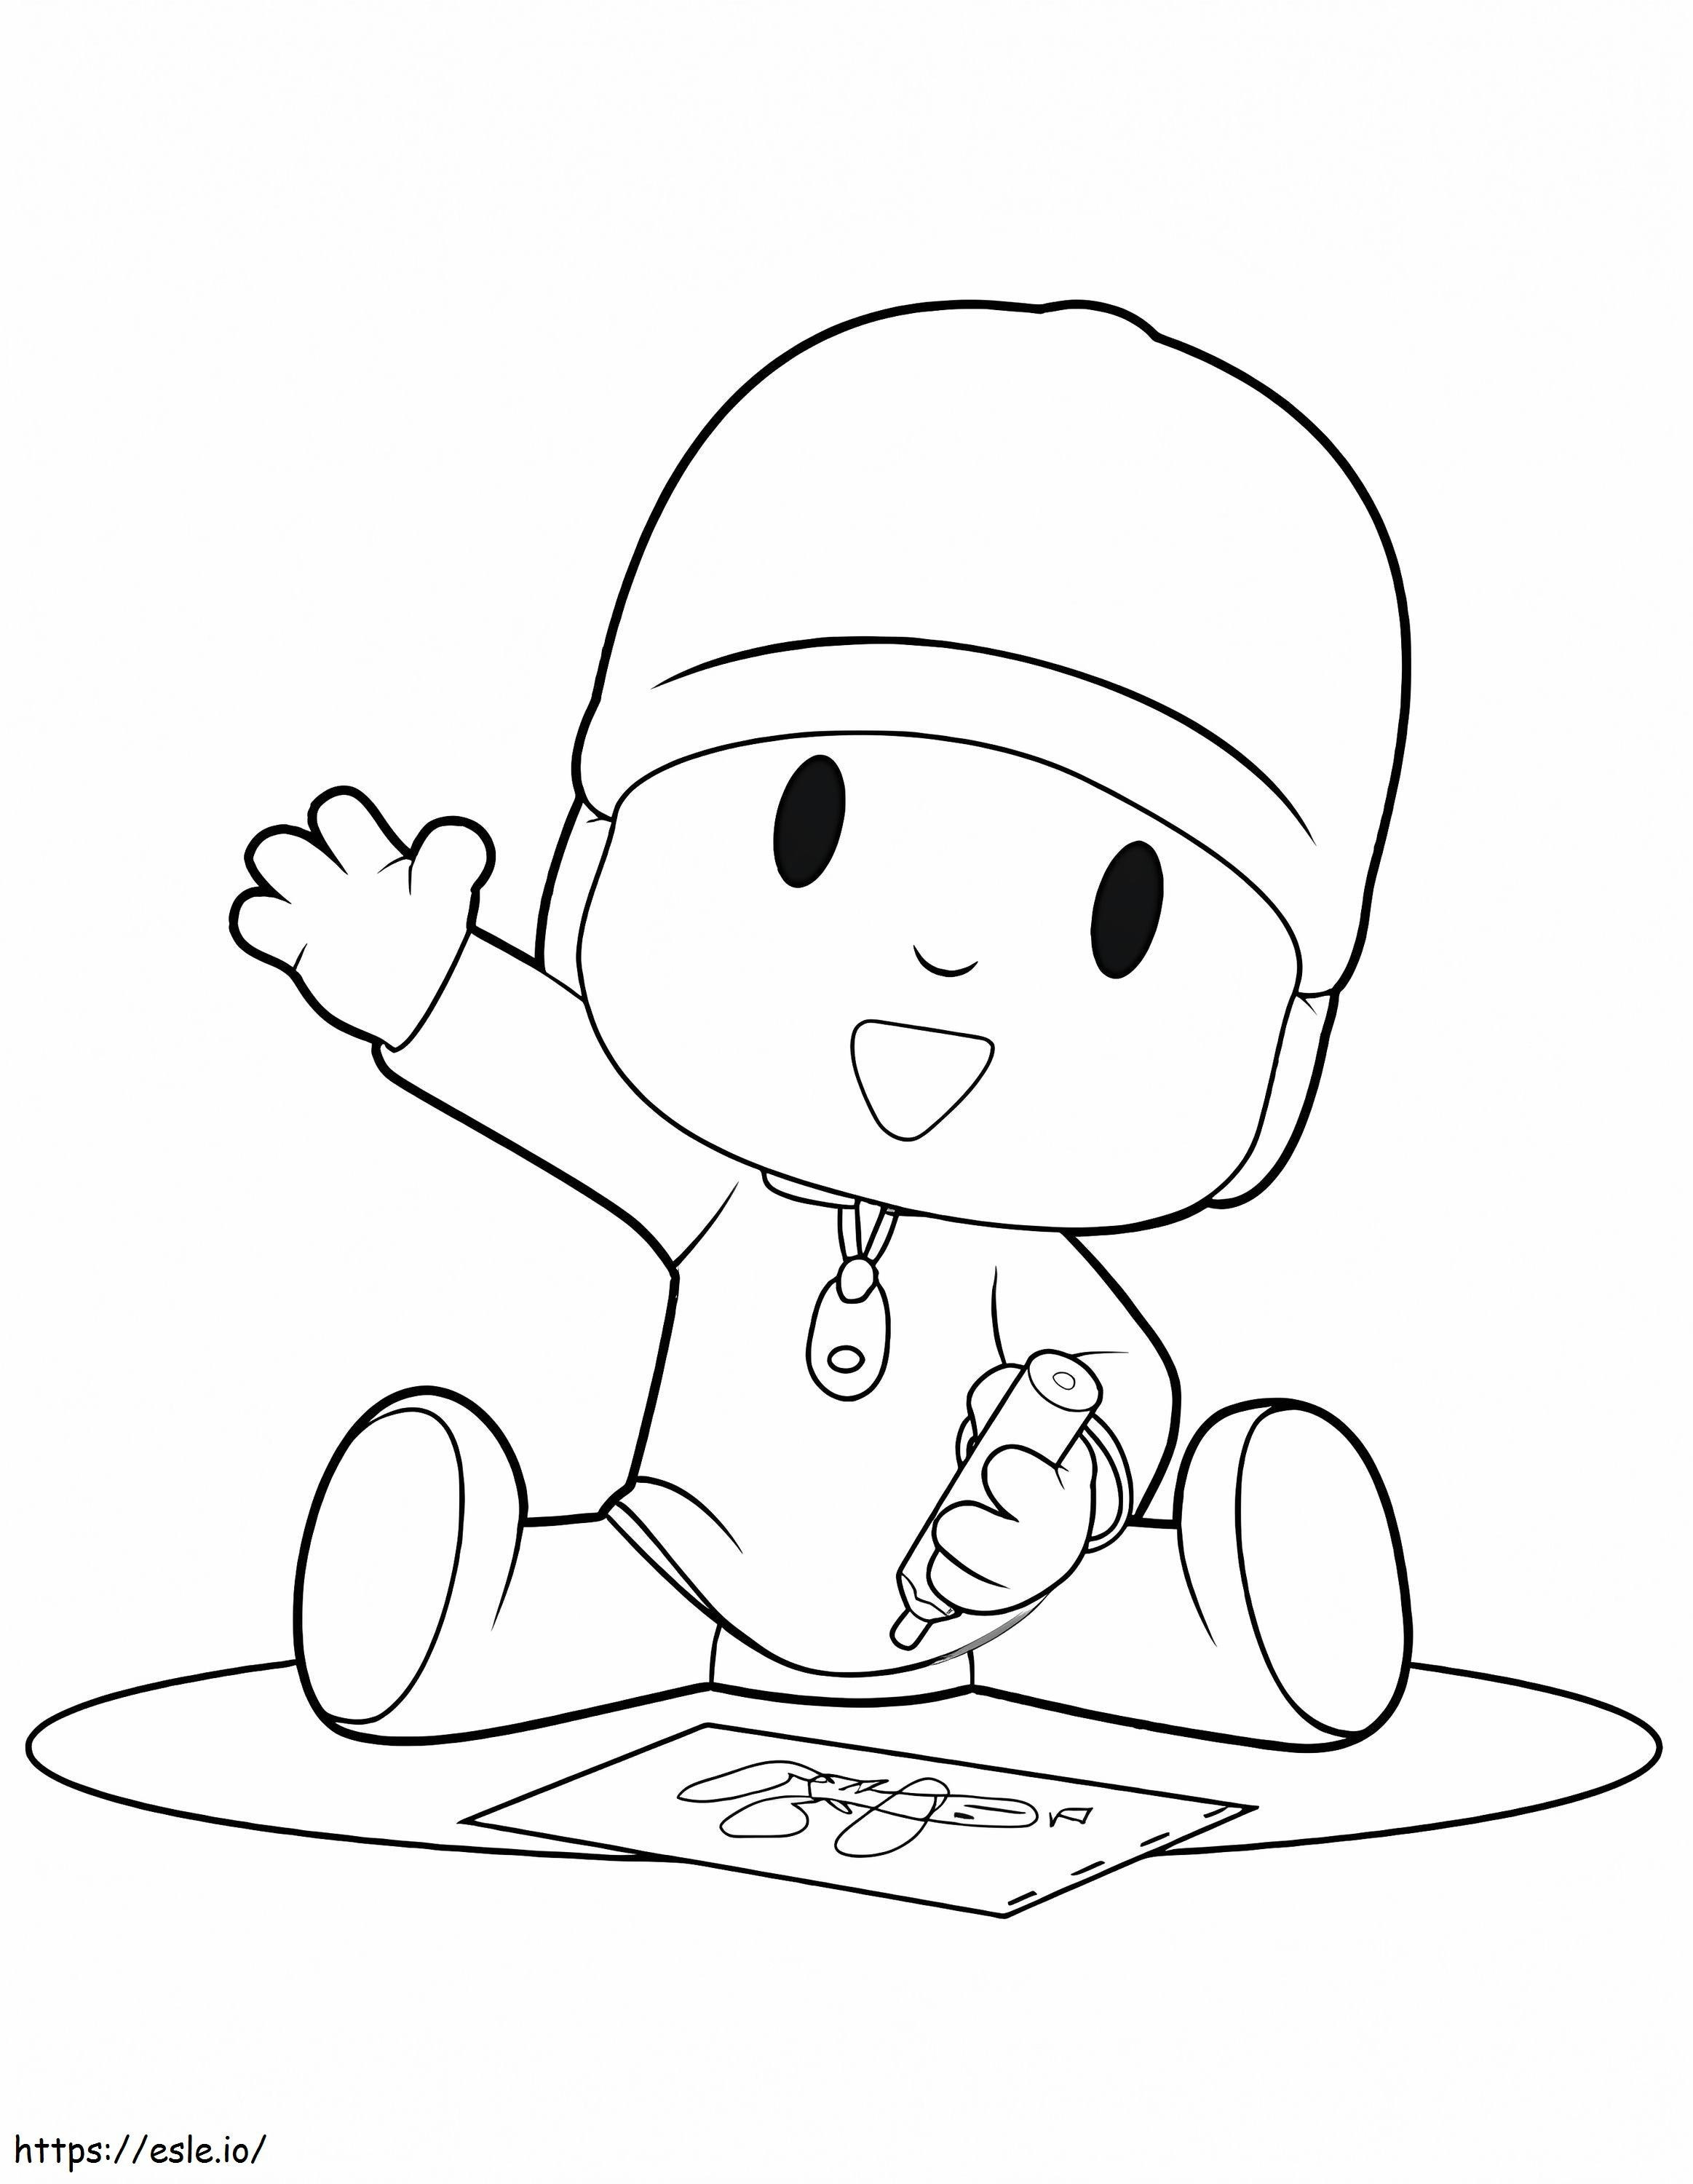 1583139417 I97Yr9V coloring page